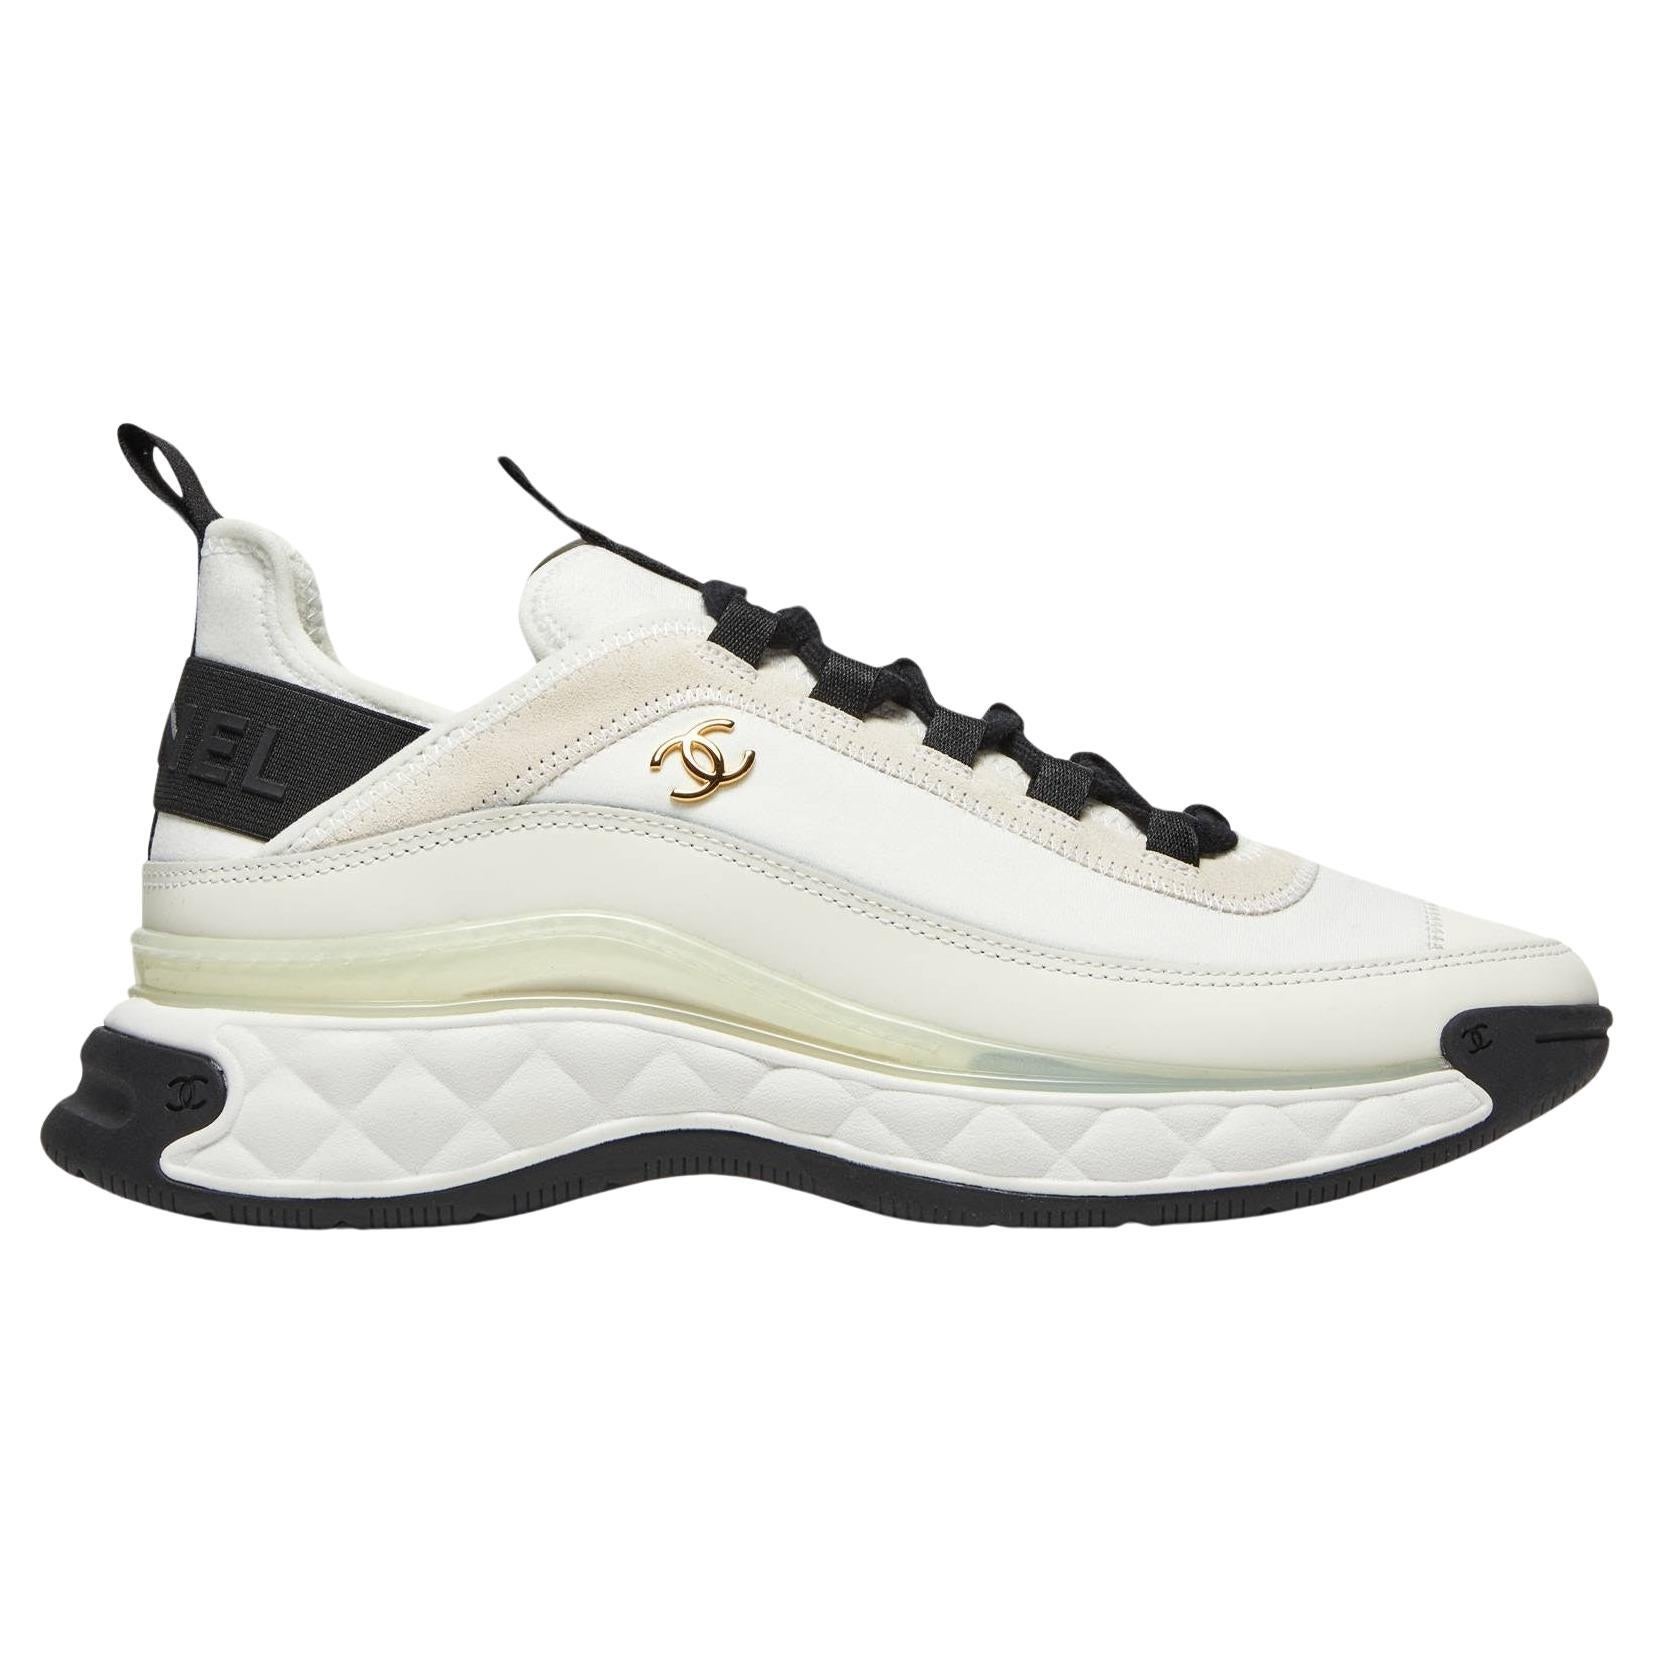 Chanel Beige Velvet Cream Beige  White Trainers Sneakers 

Size 40

New in Box

Black accents 
Gold Chanel CC on each shoe
Ivory Beige Cream White and Black
White fabric, ivory suede, white calfskin leather
High-performance rubber construction for